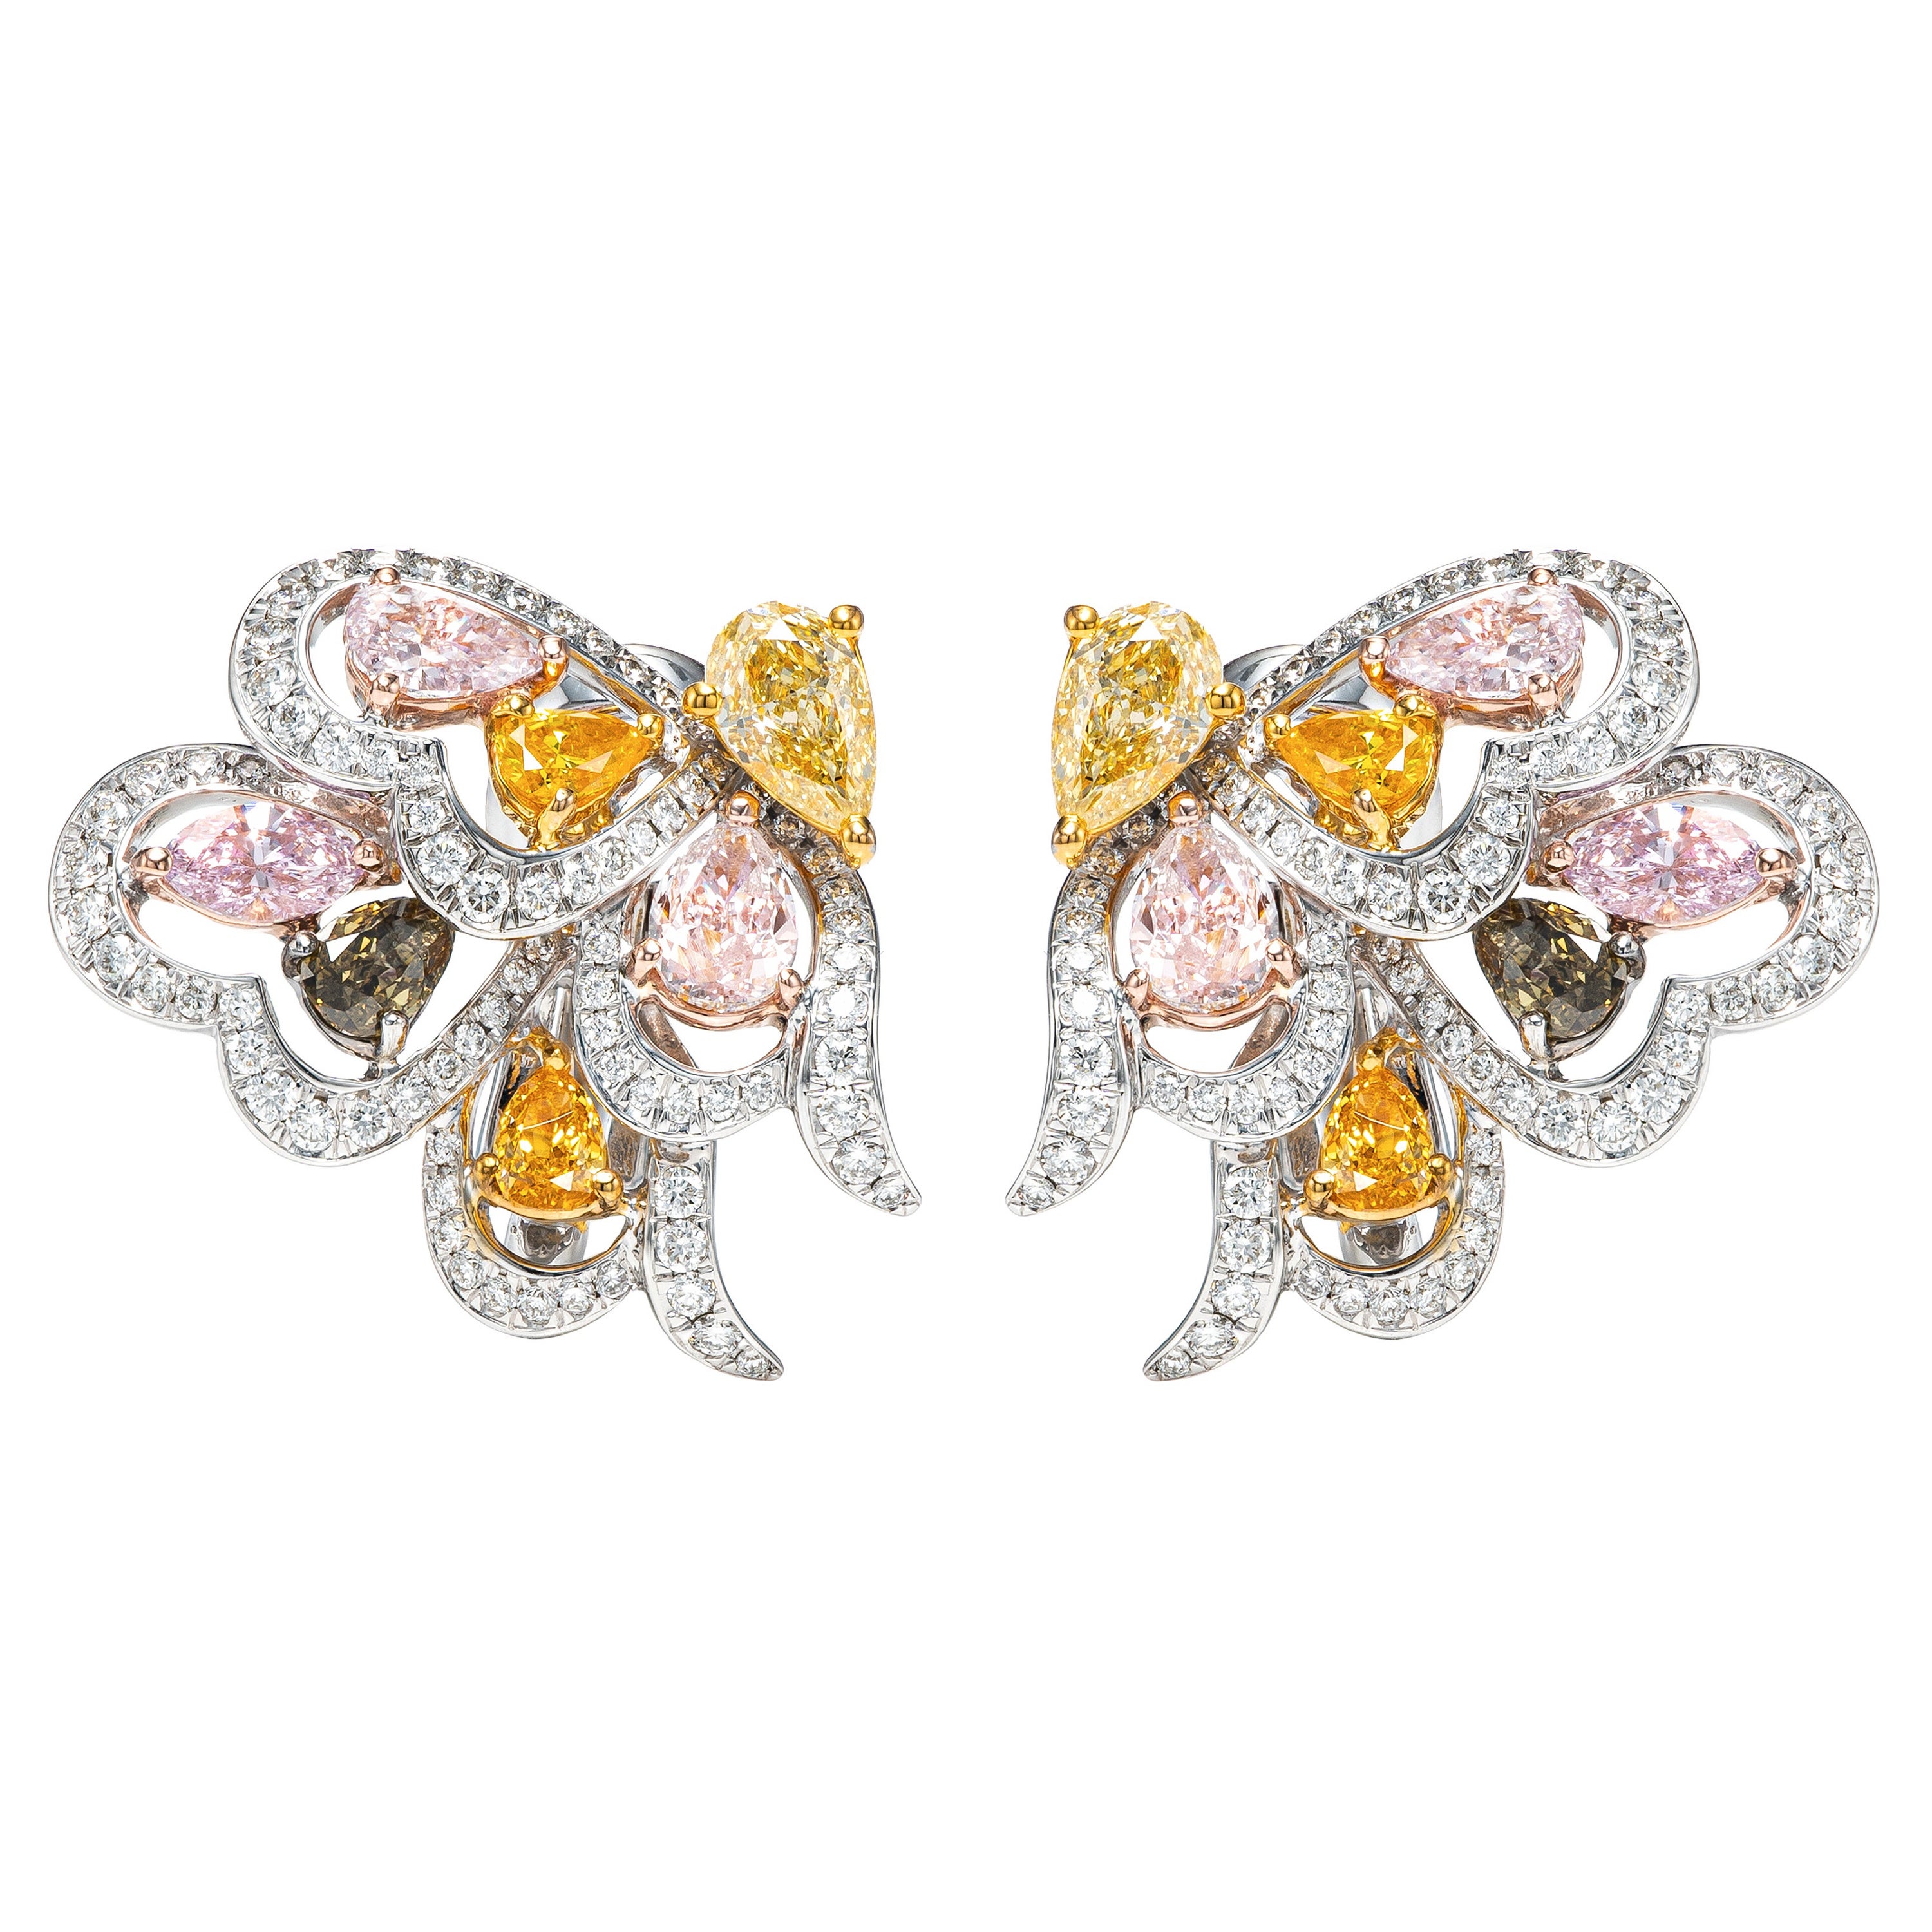 2.94 Carat Dragonfly Green, Yellow, Orange, Blue and Pink Diamond Earrings